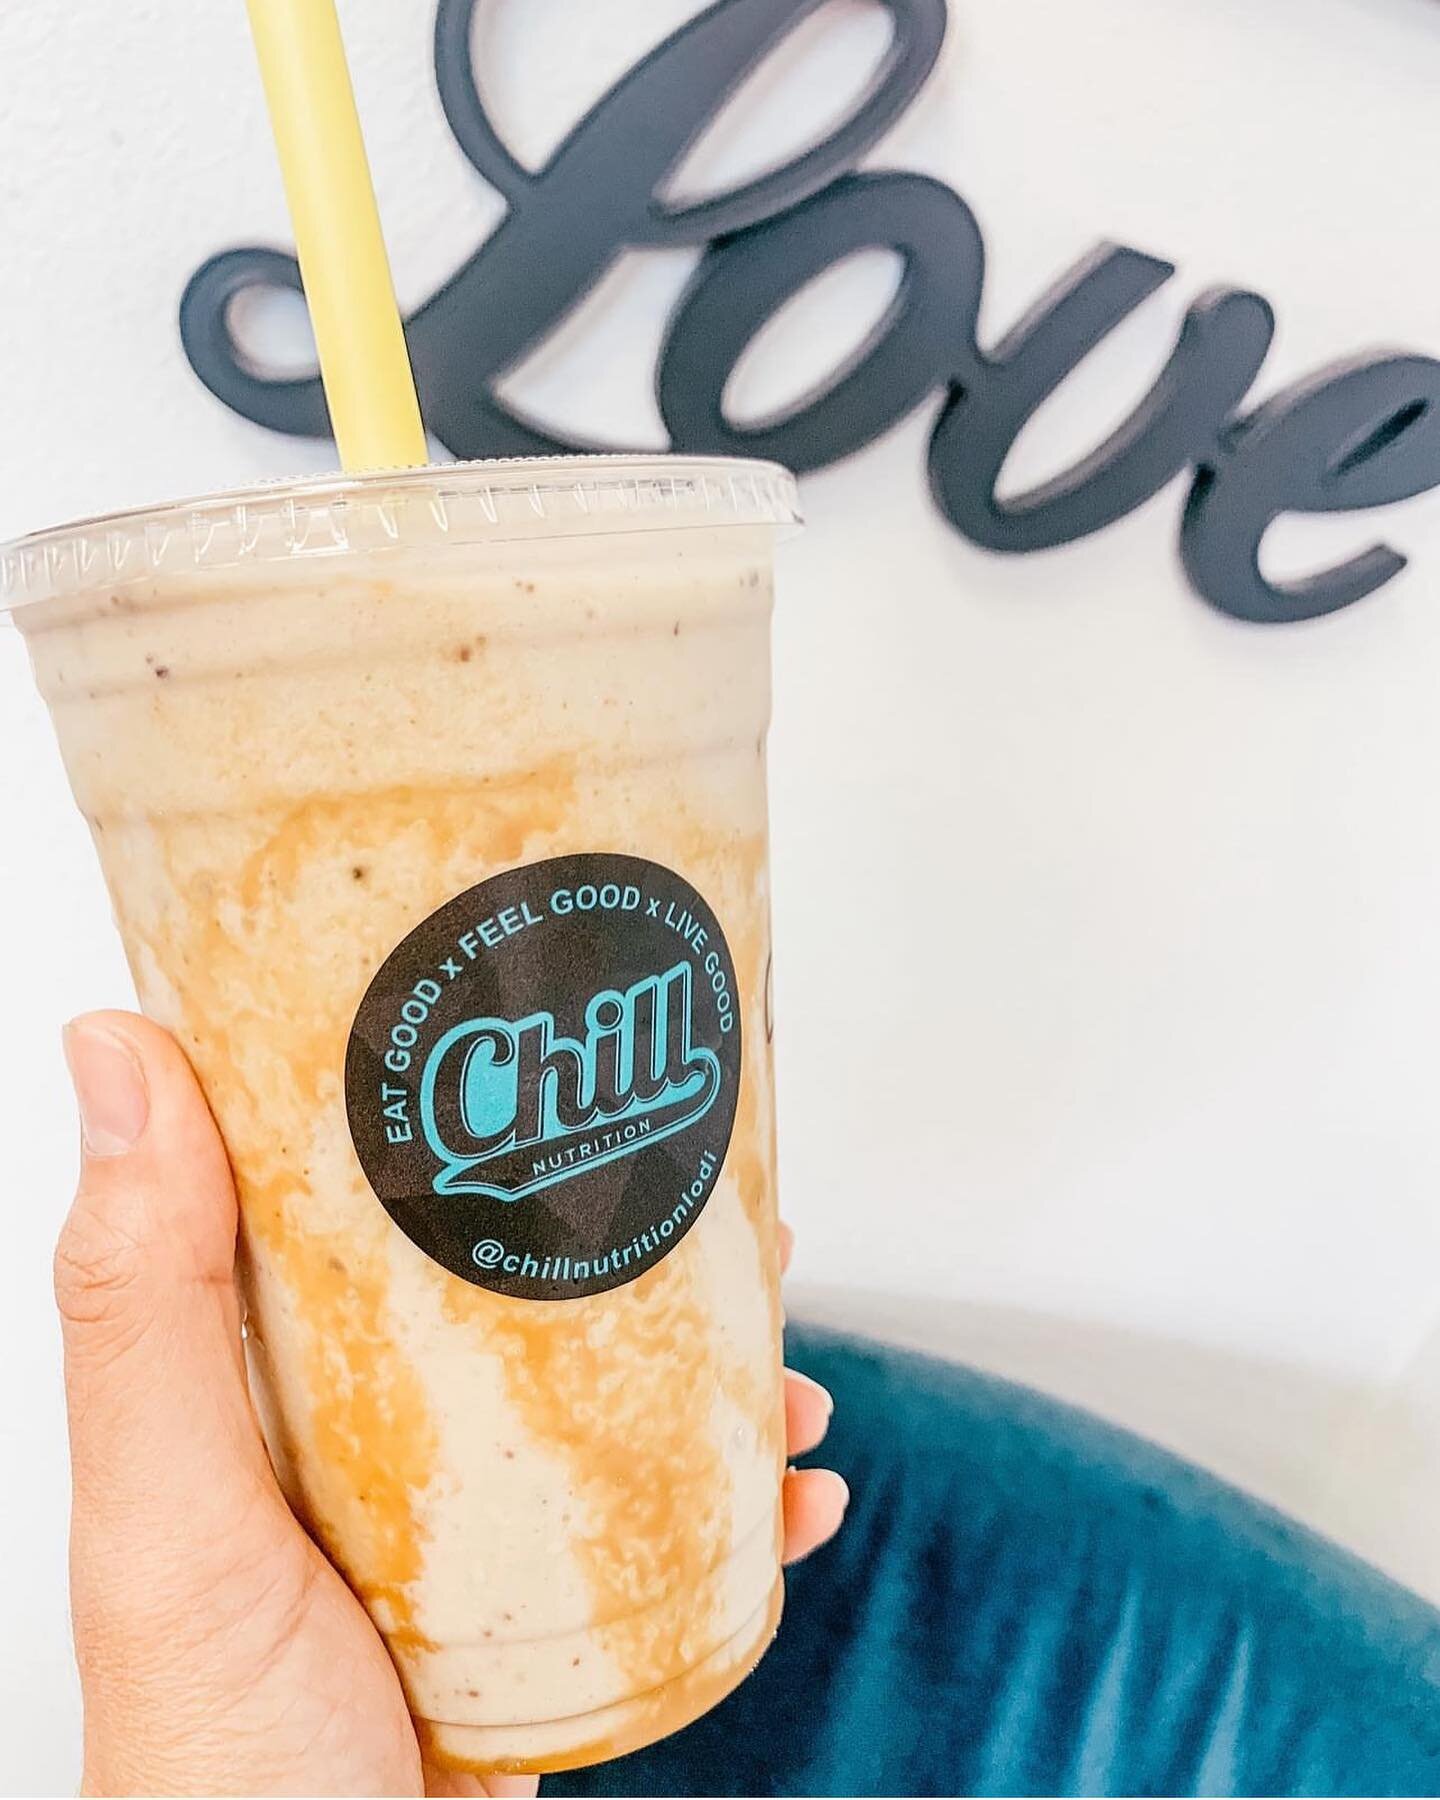 All love and good vibes only at Chill! 

Happy FRIYAY! 
#chilllodi #mealshakes #energyteas #nutrition #fitness #lodidrinks #lodihealthy